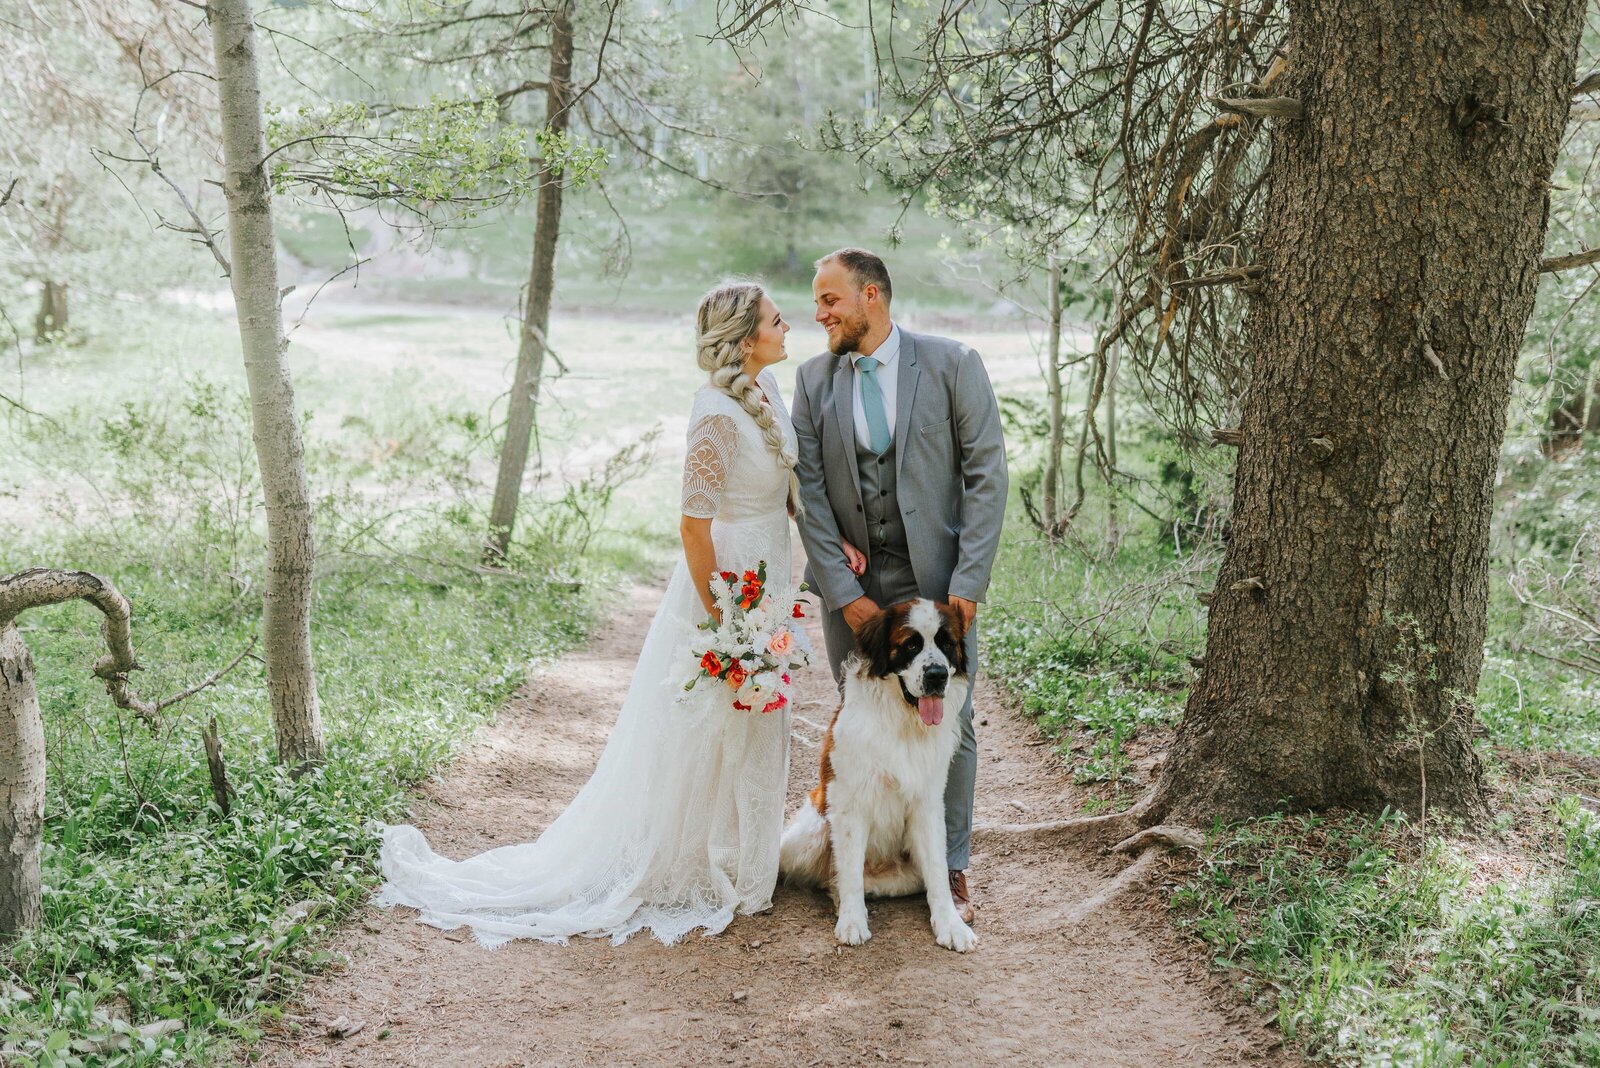 Big Sur wedding photographer captures couple in forest with dog during bridal portraits